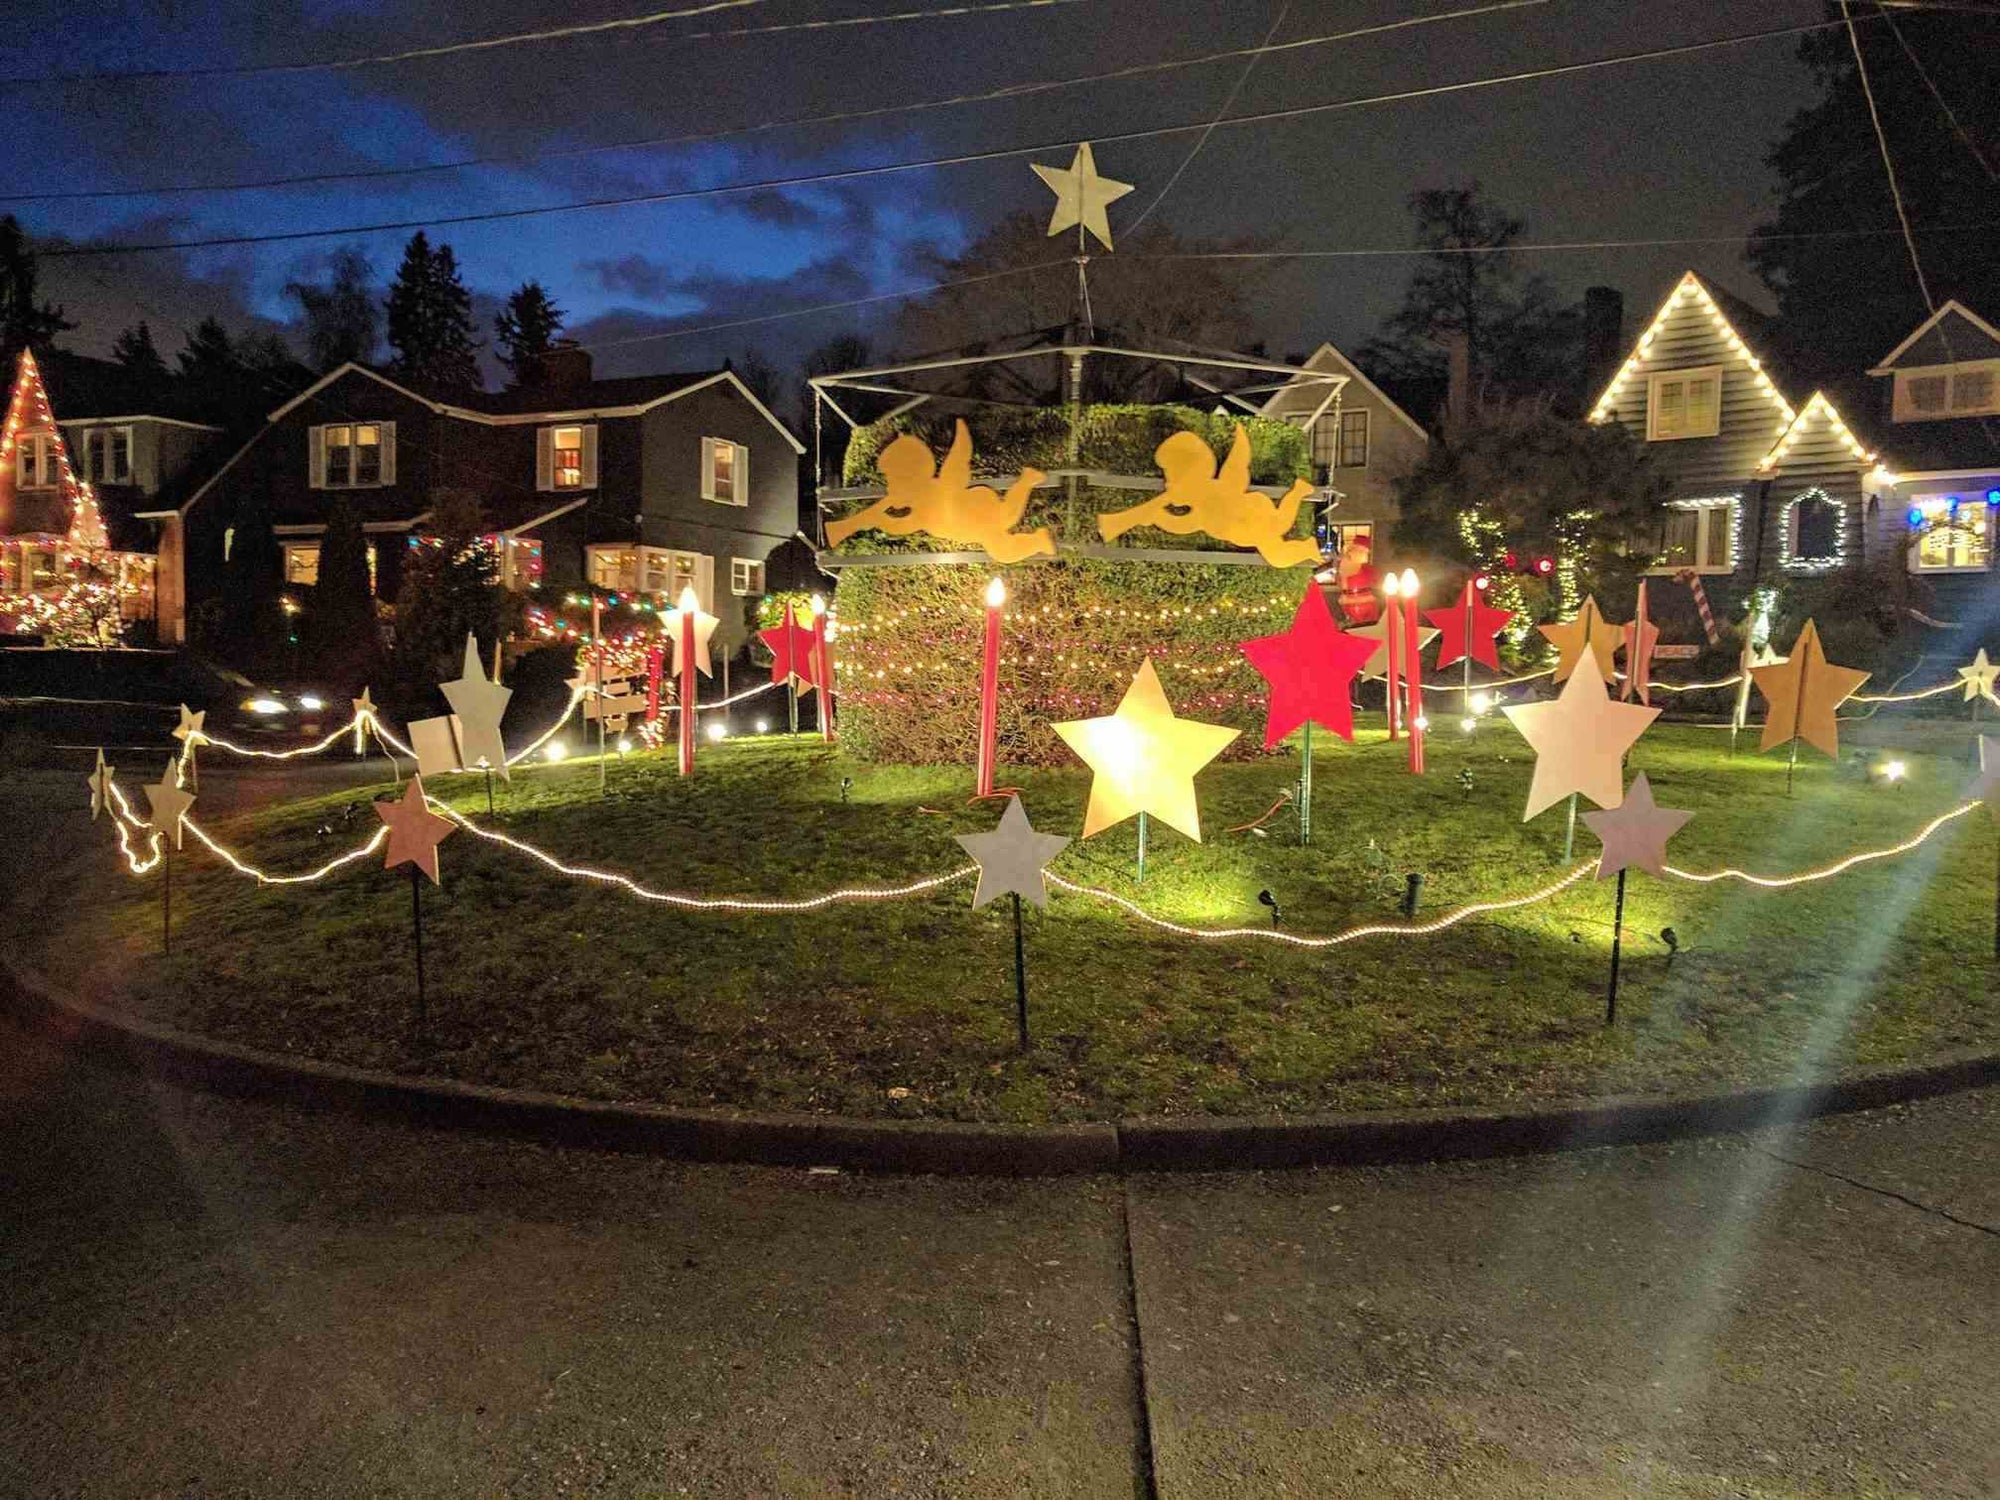 Christmas Eve on Seattle's Candy Cane Lane